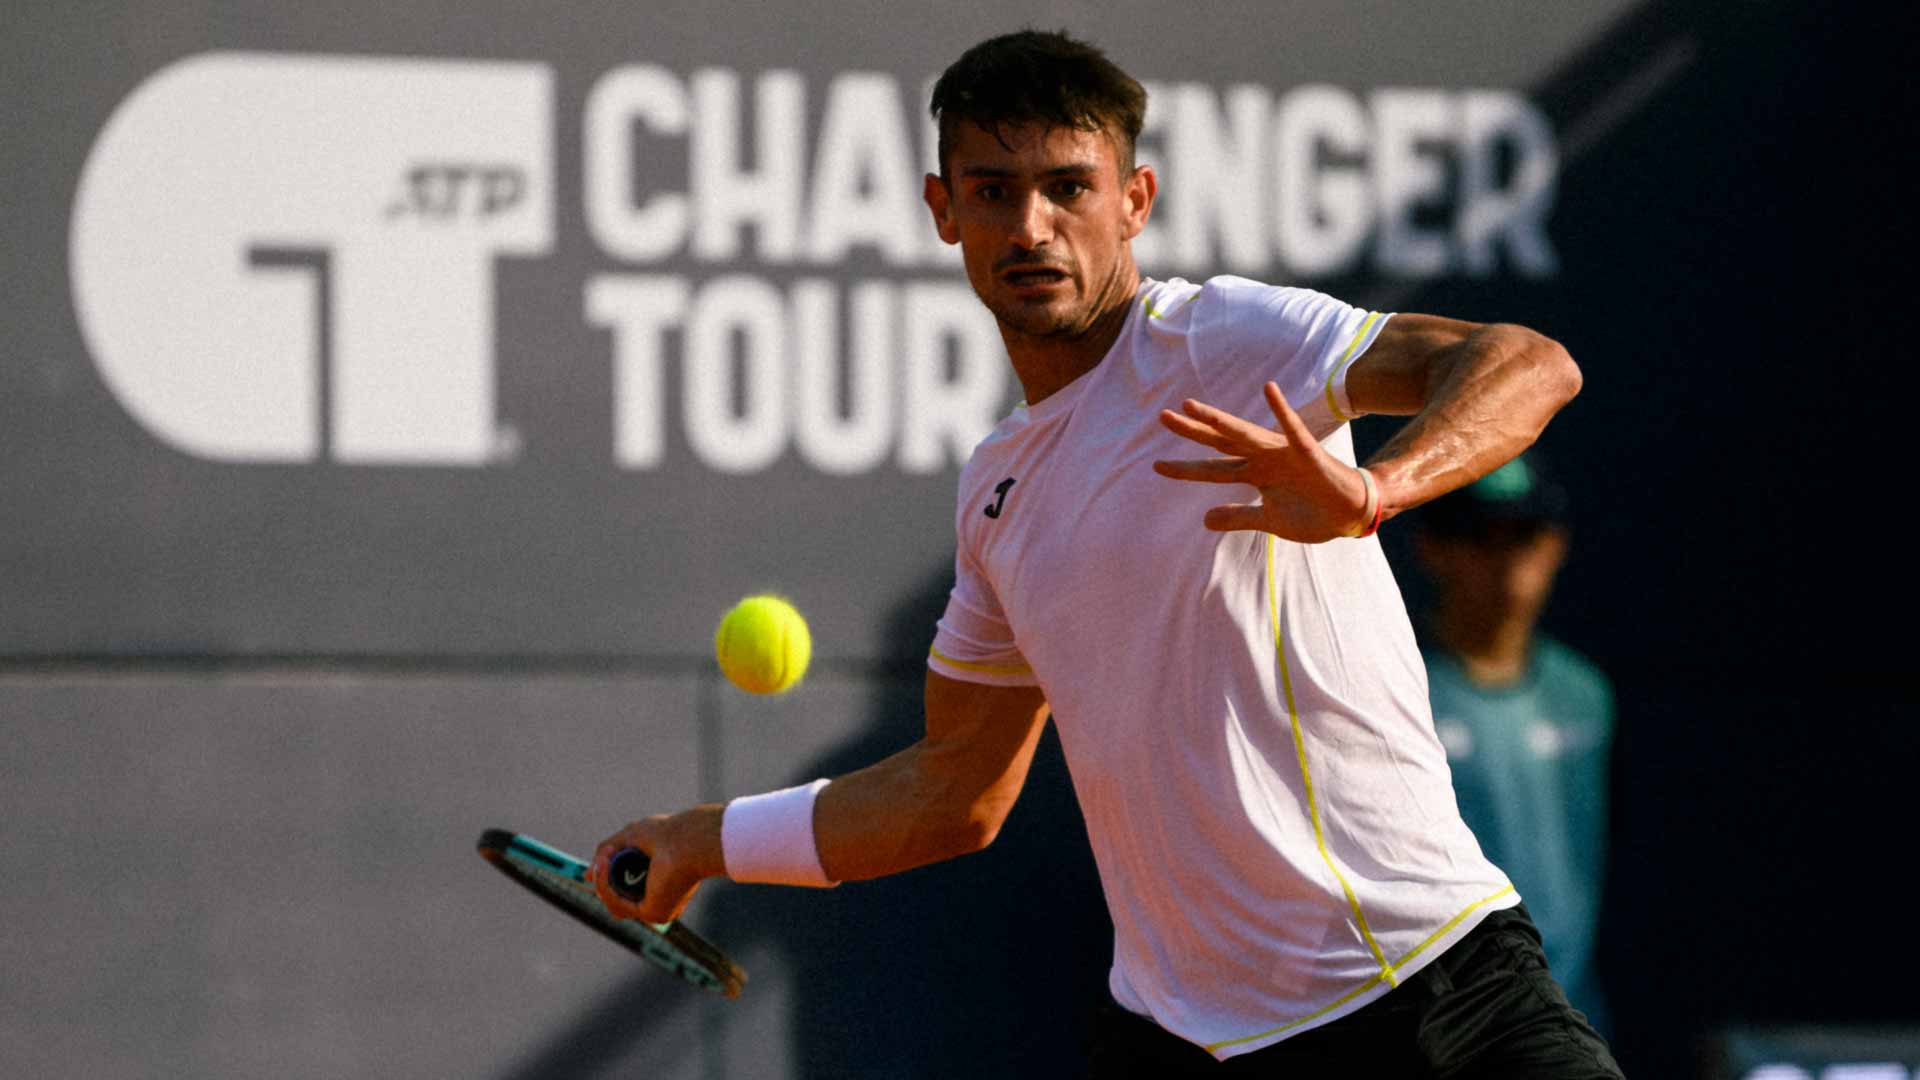 Mariano Navone is a six-time ATP Challenger Tour champion.